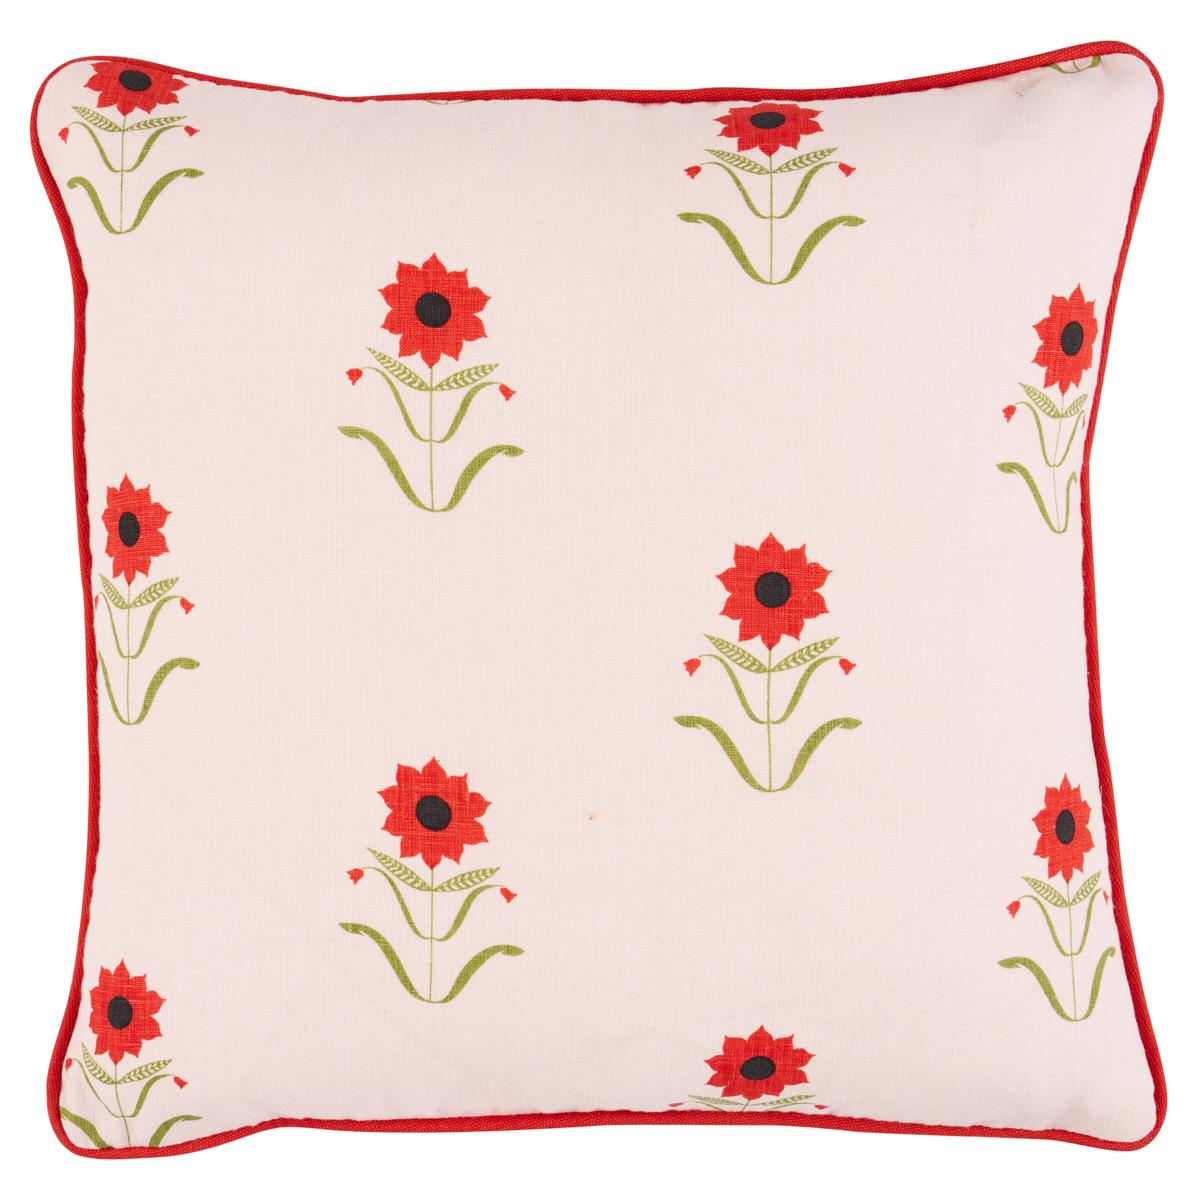 Forget Me Nots Pillow in Red on Pink 16 x 16" For Sale